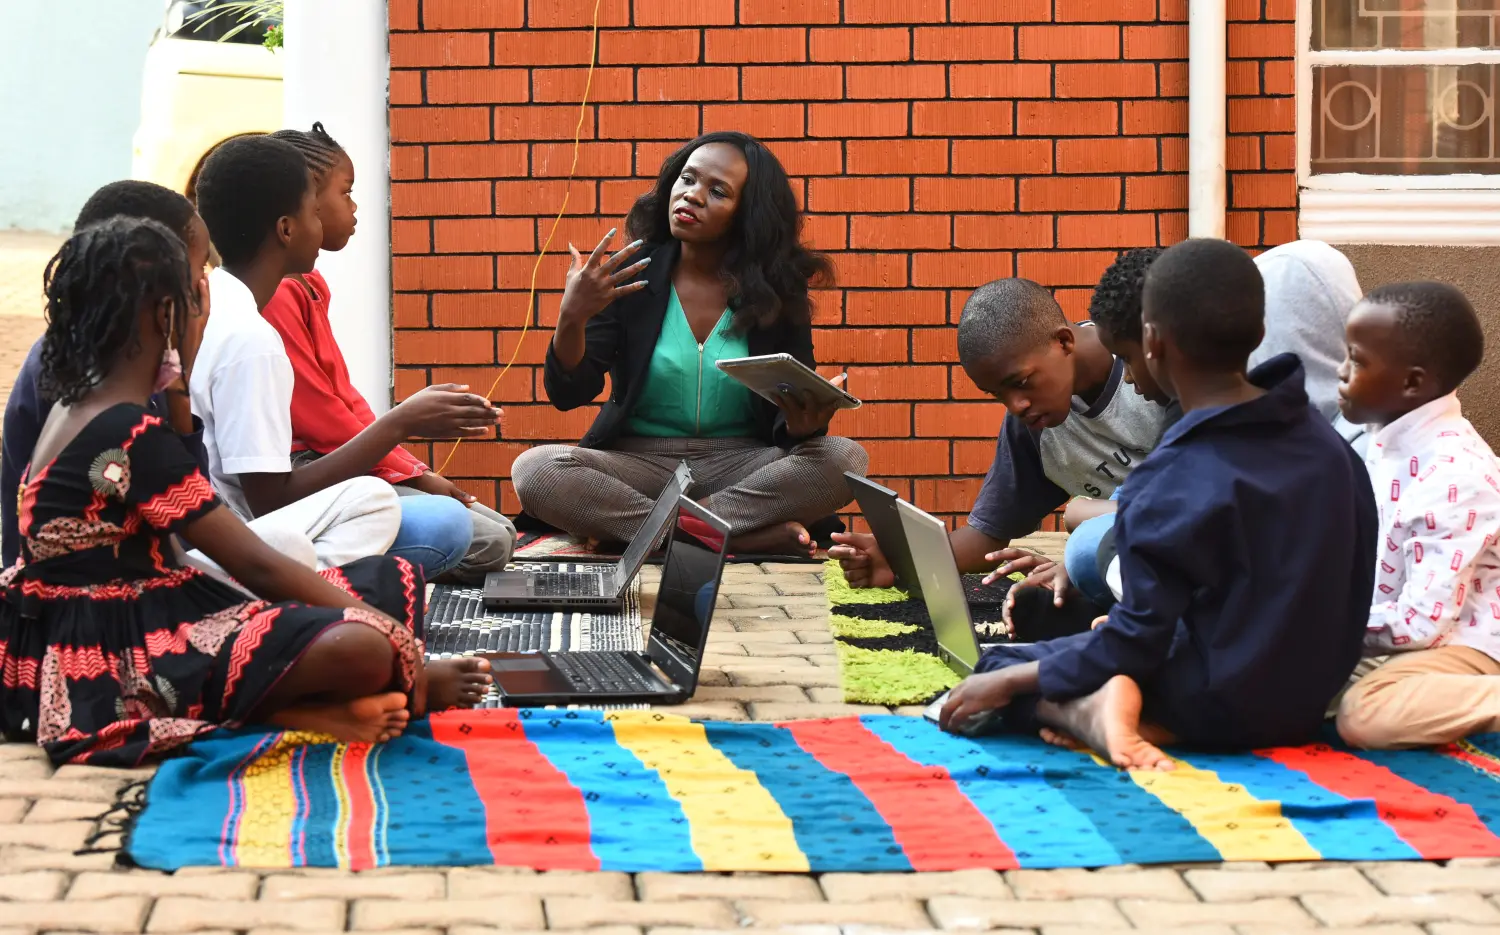 Shamim Mwanaisha, a travel consultant and trainer, leads students in coding, aviation, space and climate change during a tutorial session at her home in Kitintale suburb of Kampala, Uganda August 28, 2021. Picture taken August 28, 2021. REUTERS/Abubaker Lubowa